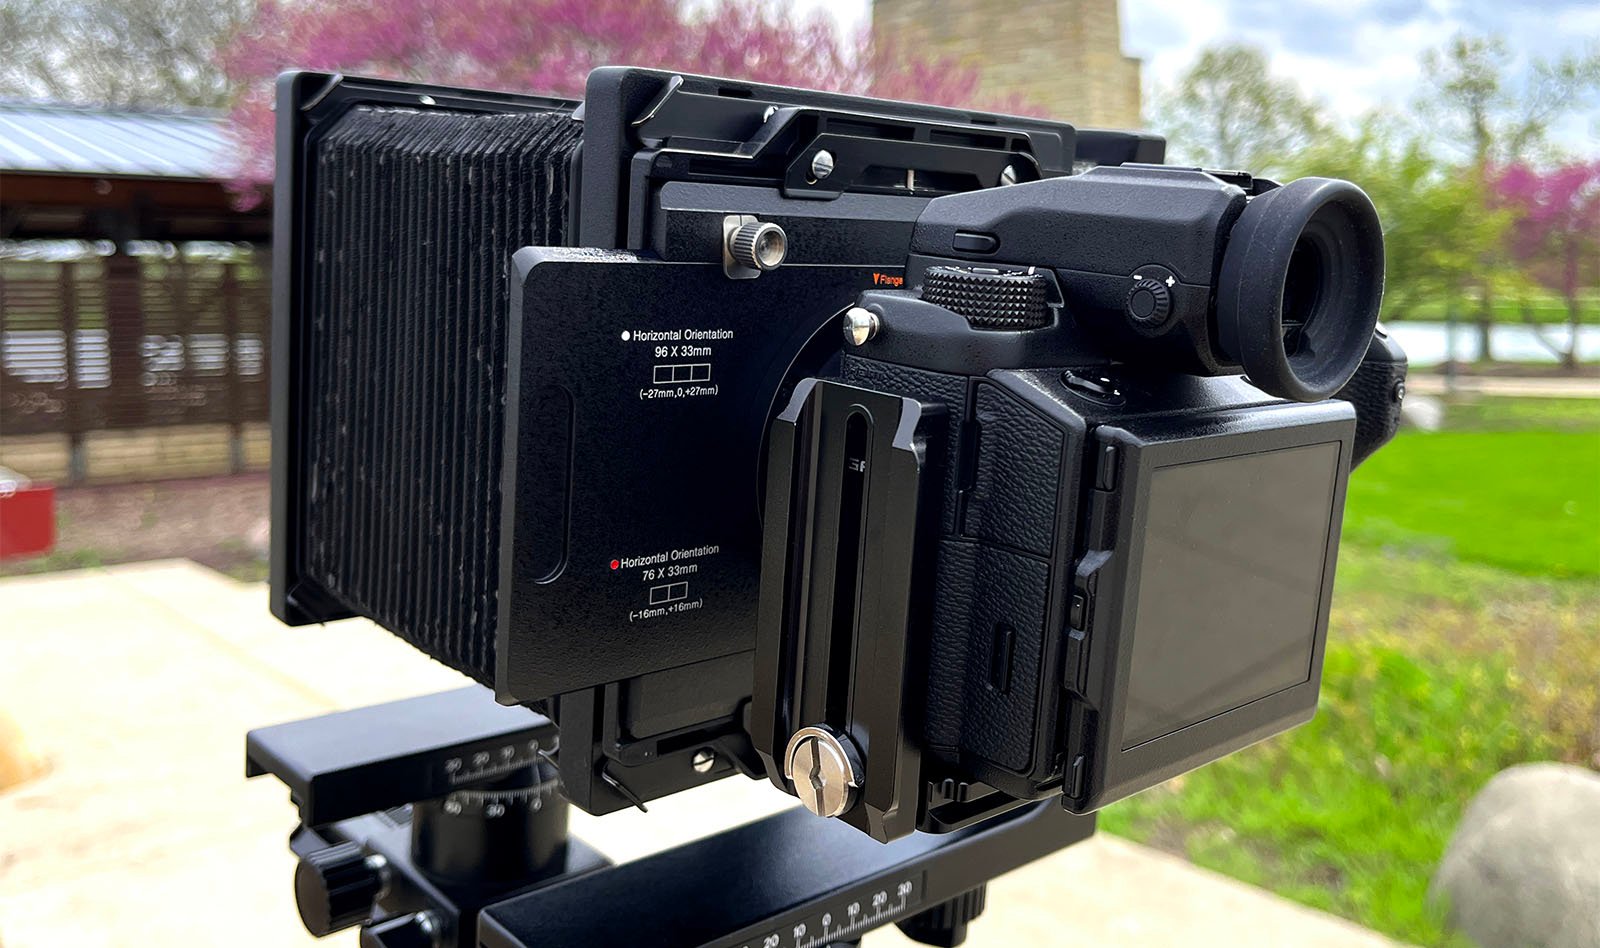 A close-up of a large format camera mounted on a tripod outdoors, focusing on its intricate black body and controls, with a blurred green park background.